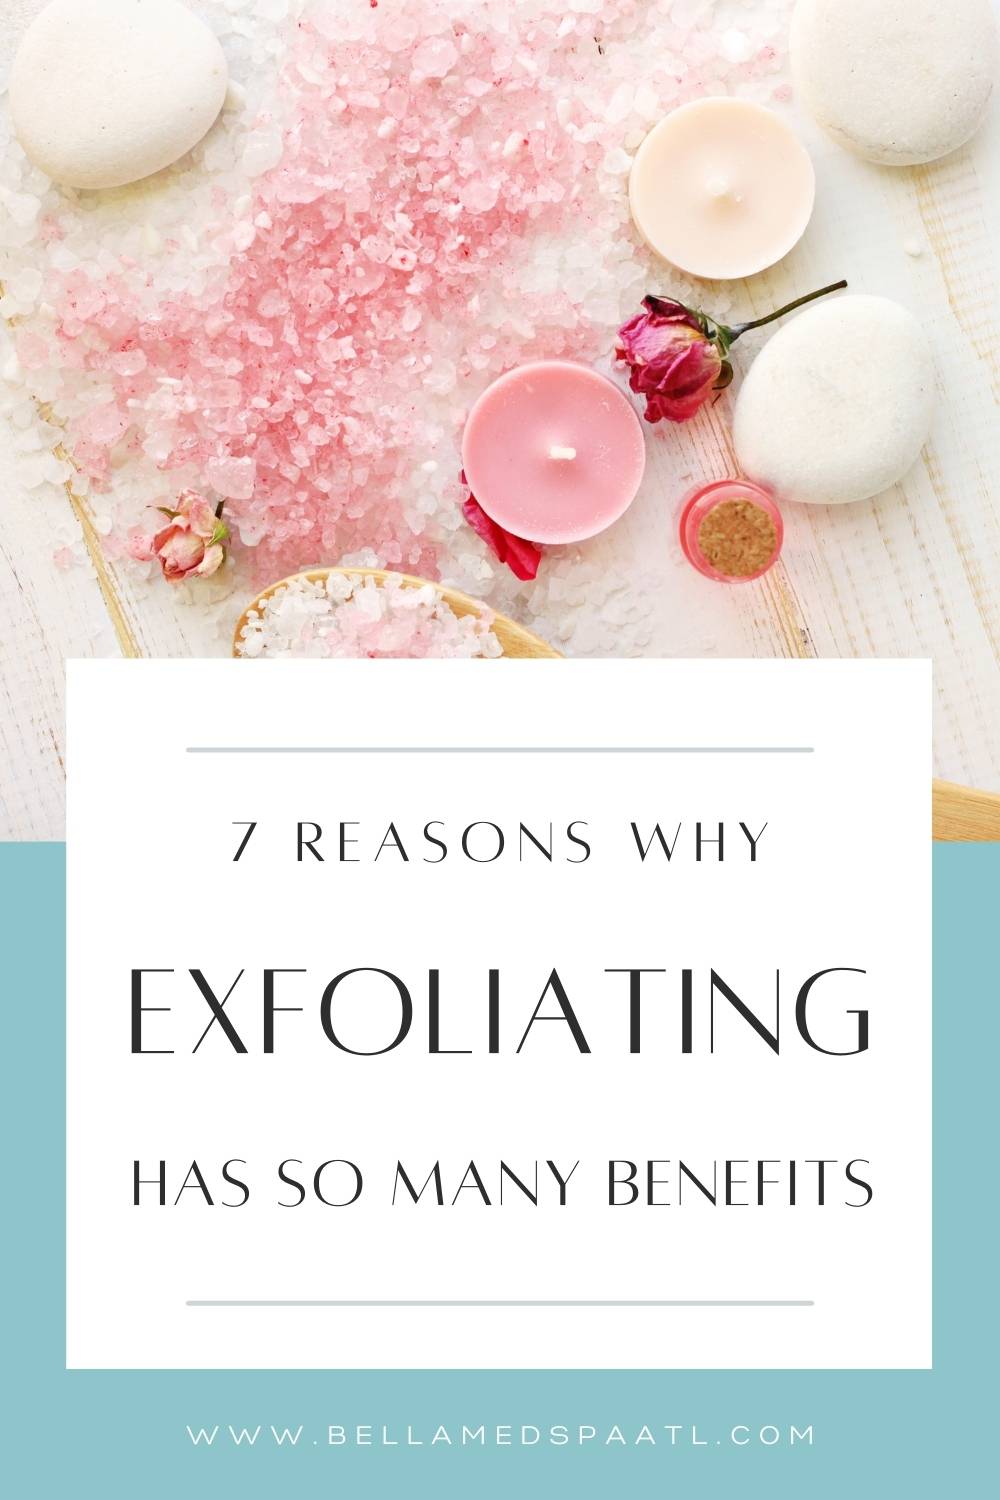 Wondering how to brighten your skin and reduce sings of aging? Exfoliating your skin should be a regular step in your skincare routine if glowing skin is what you're after. If you're wondering why exfoliating your skin is essential for skincare, here are the benefits of exfoliating!